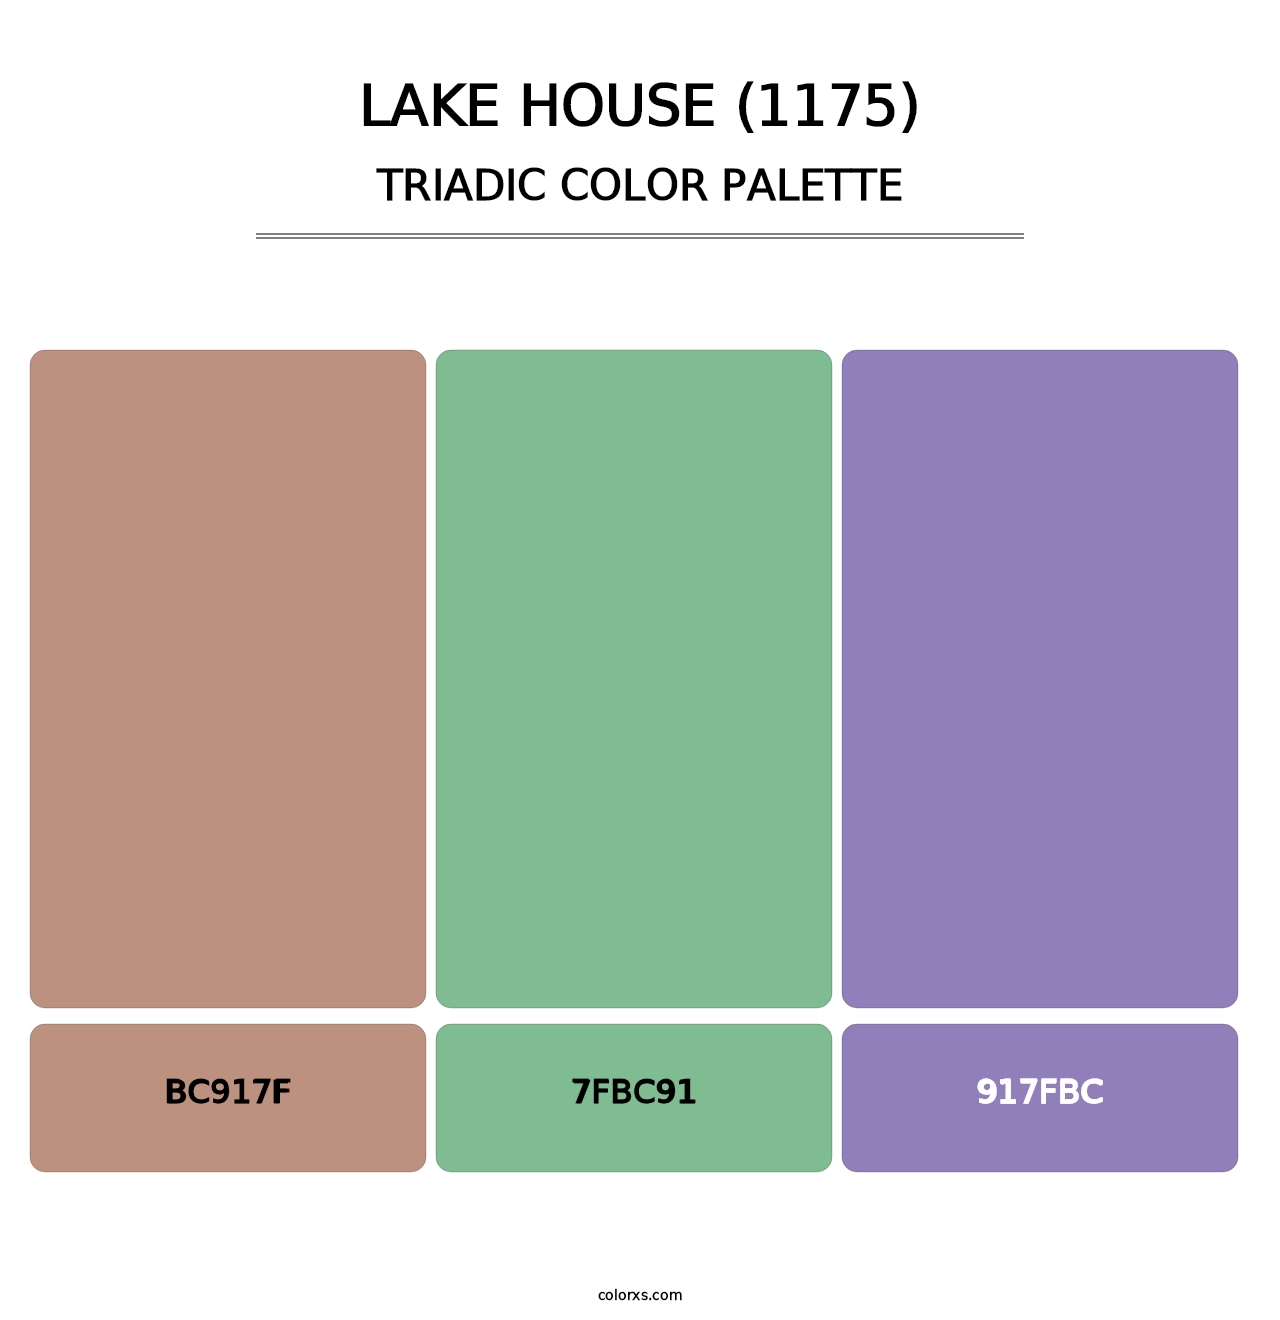 Lake House (1175) - Triadic Color Palette